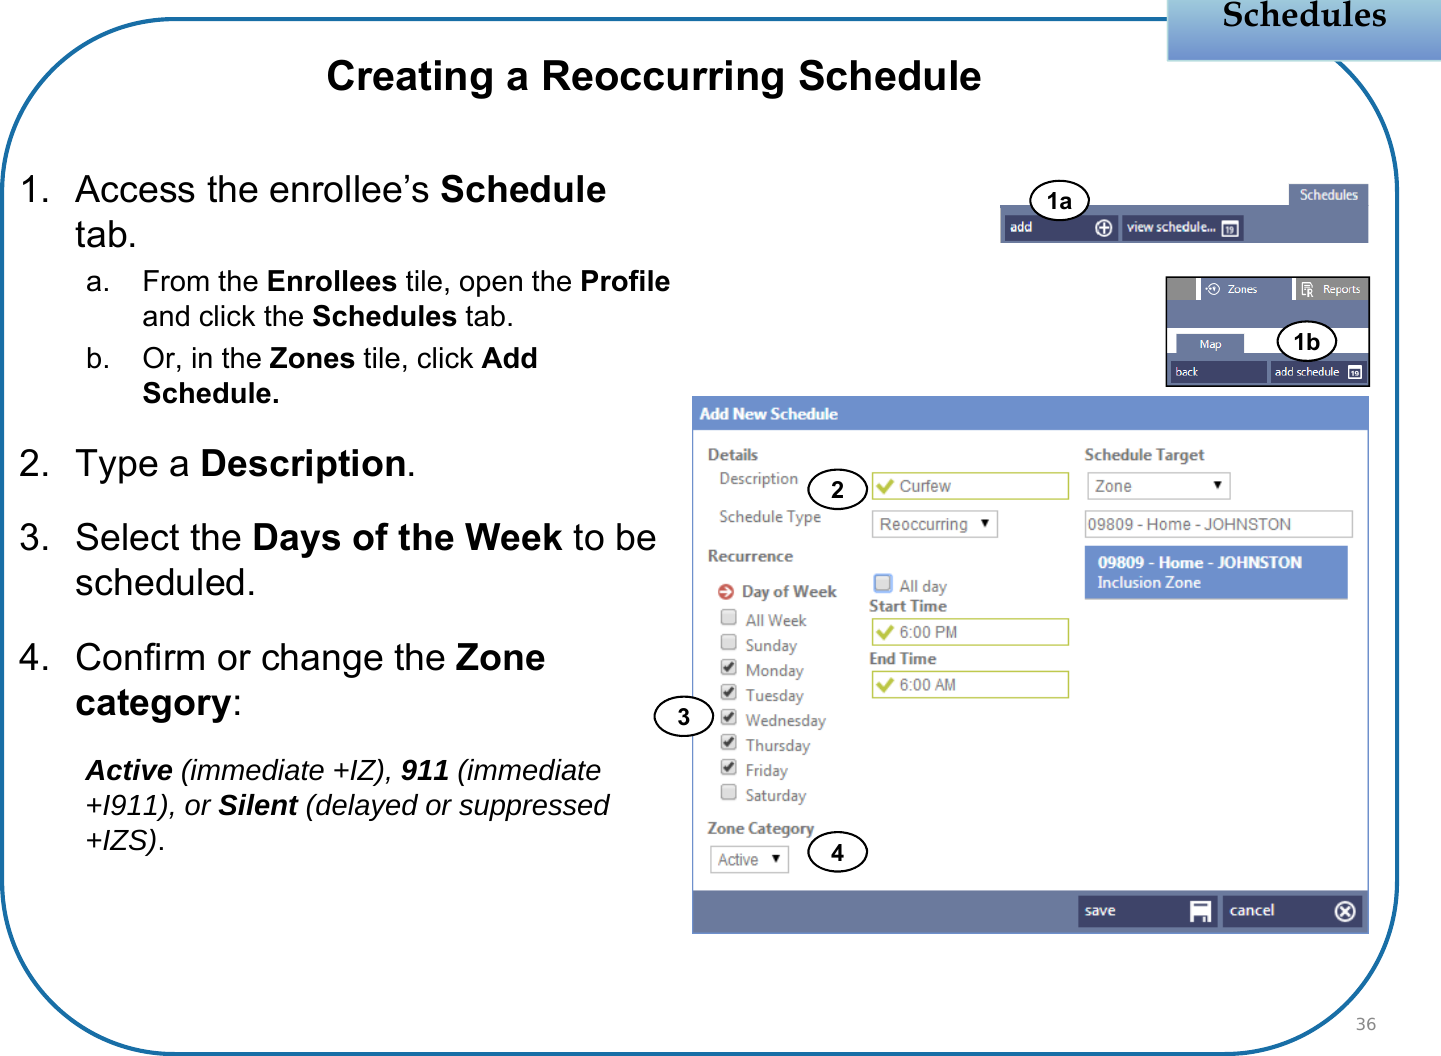 Schedules1. Access the enrollee’s Scheduletab.a. From the Enrollees tile, open the Profileand click the Schedules tab.b. Or, in the Zones tile, click Add Schedule.2. Type a Description.3. Select the Days of the Week to be scheduled.4. Confirm or change the Zone category:Active (immediate +IZ), 911 (immediate +I911), or Silent (delayed or suppressed +IZS).36Creating a Reoccurring Schedule2341b1a